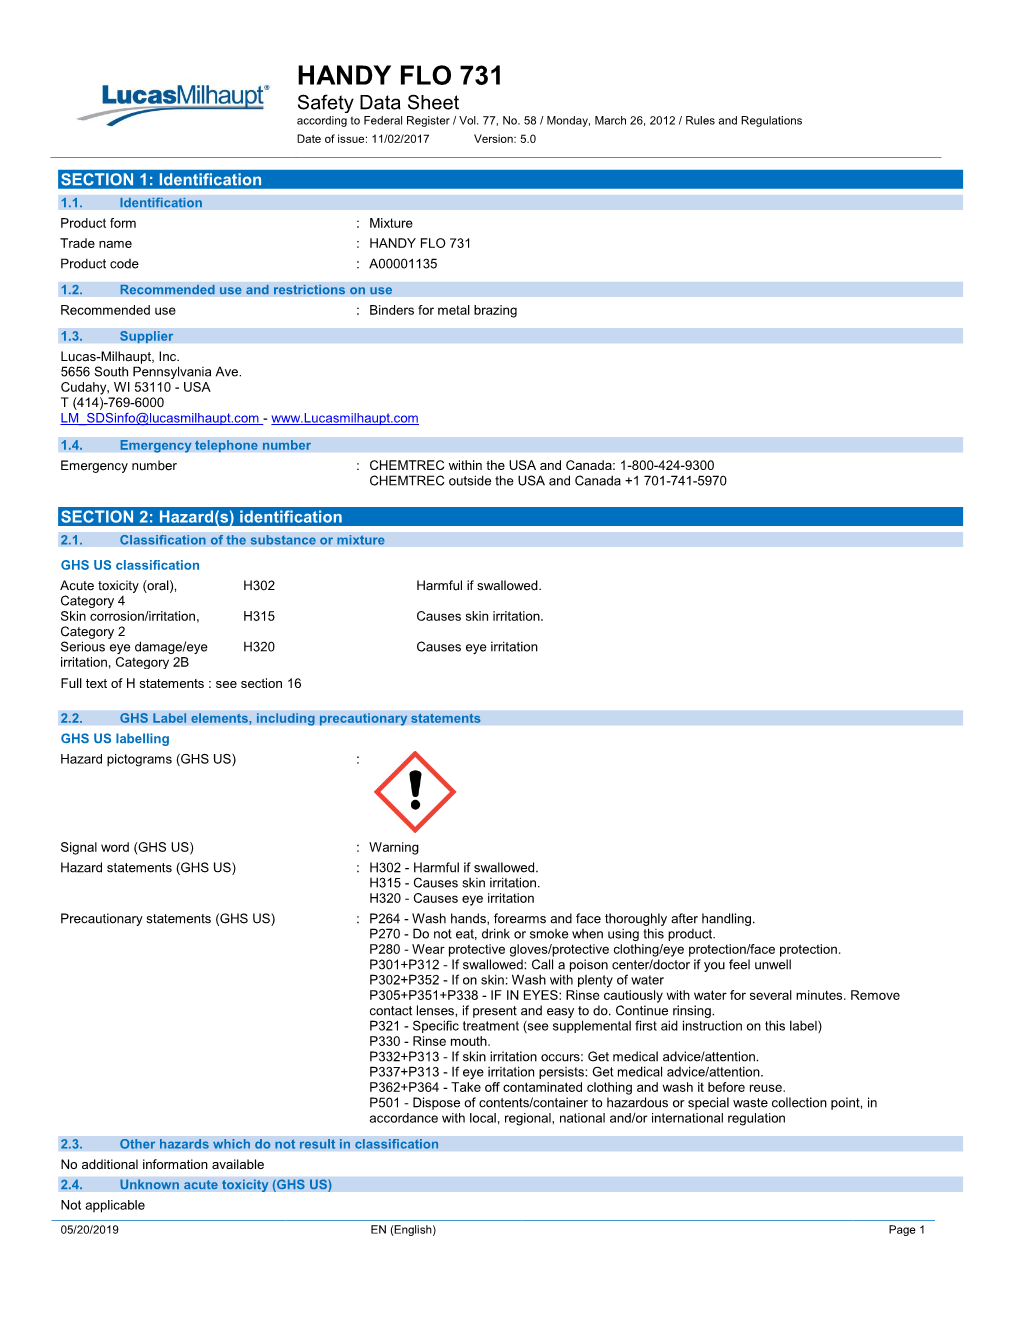 HANDY FLO 731 Safety Data Sheet According to Federal Register / Vol